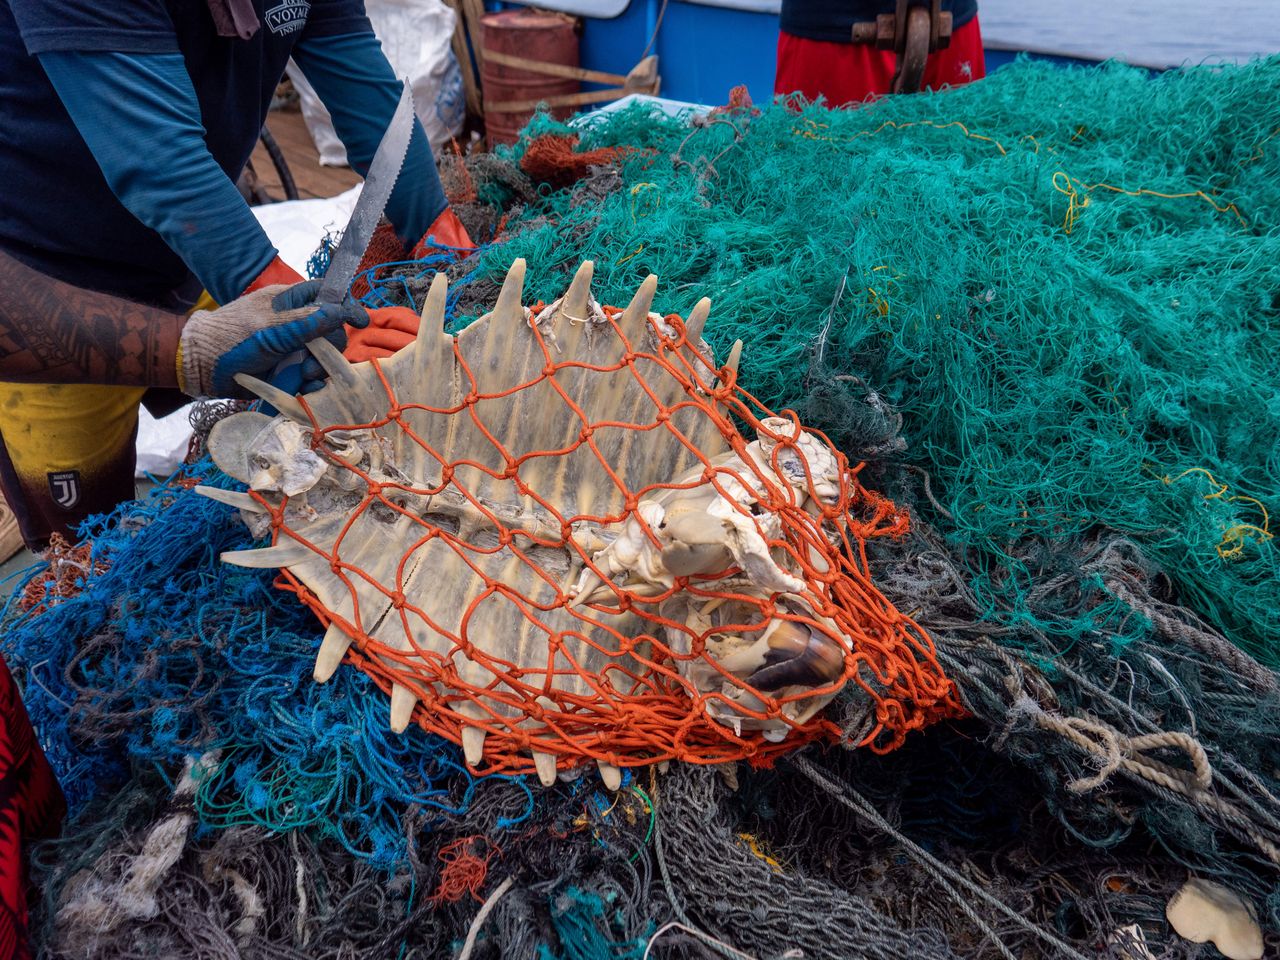 Nearly half of the waste is discarded fishing gear, in which marine animals (like turtles in the photo) can become fatally entangled.